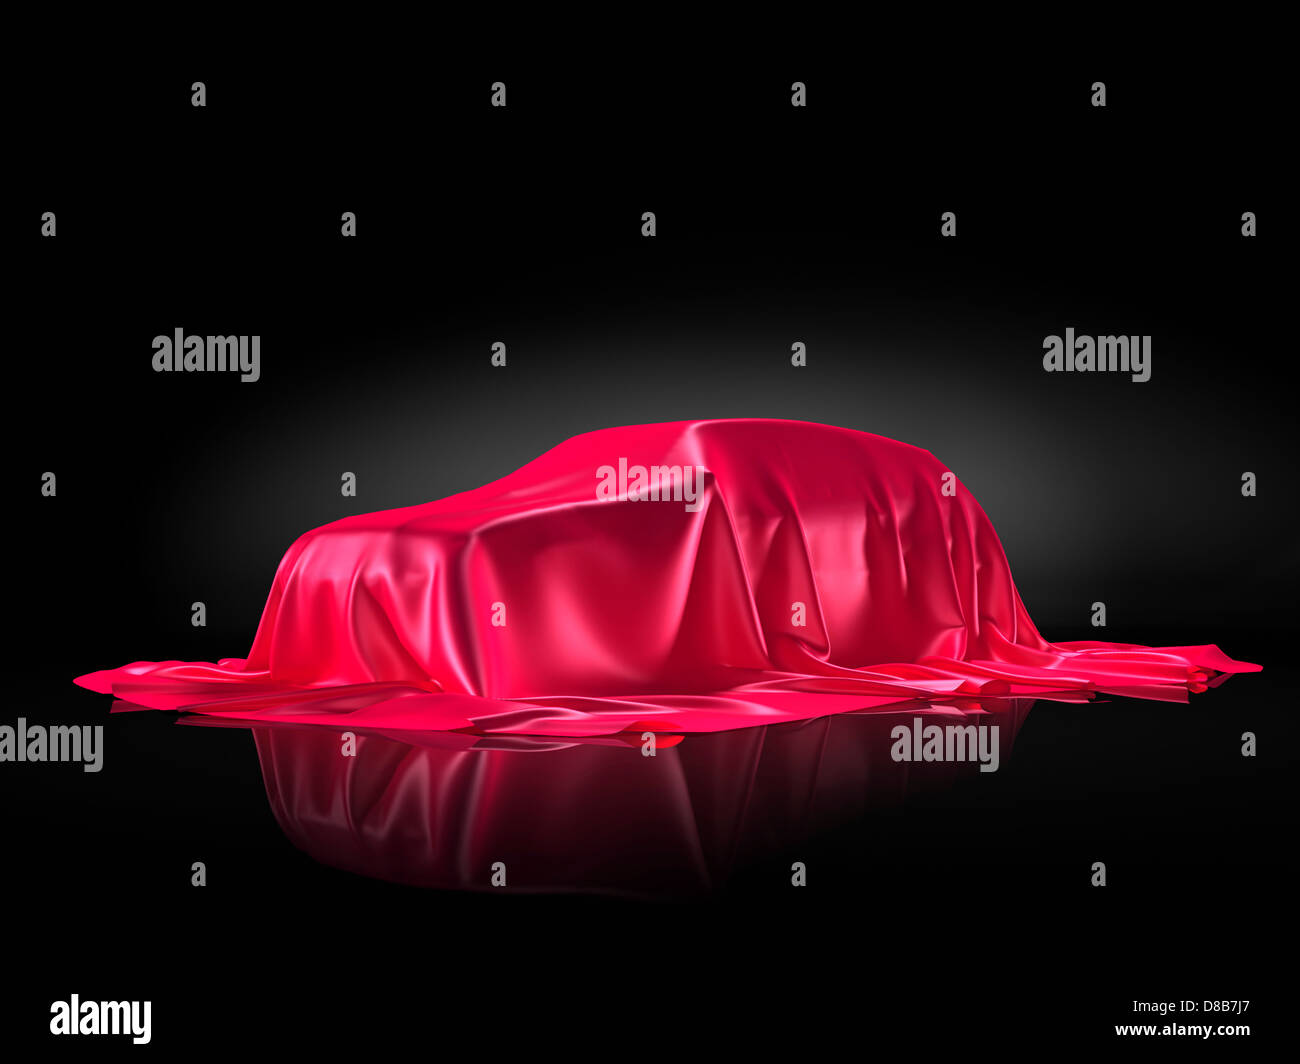 New car model on a stand under red fabric presentation concept isolated on black background Stock Photo